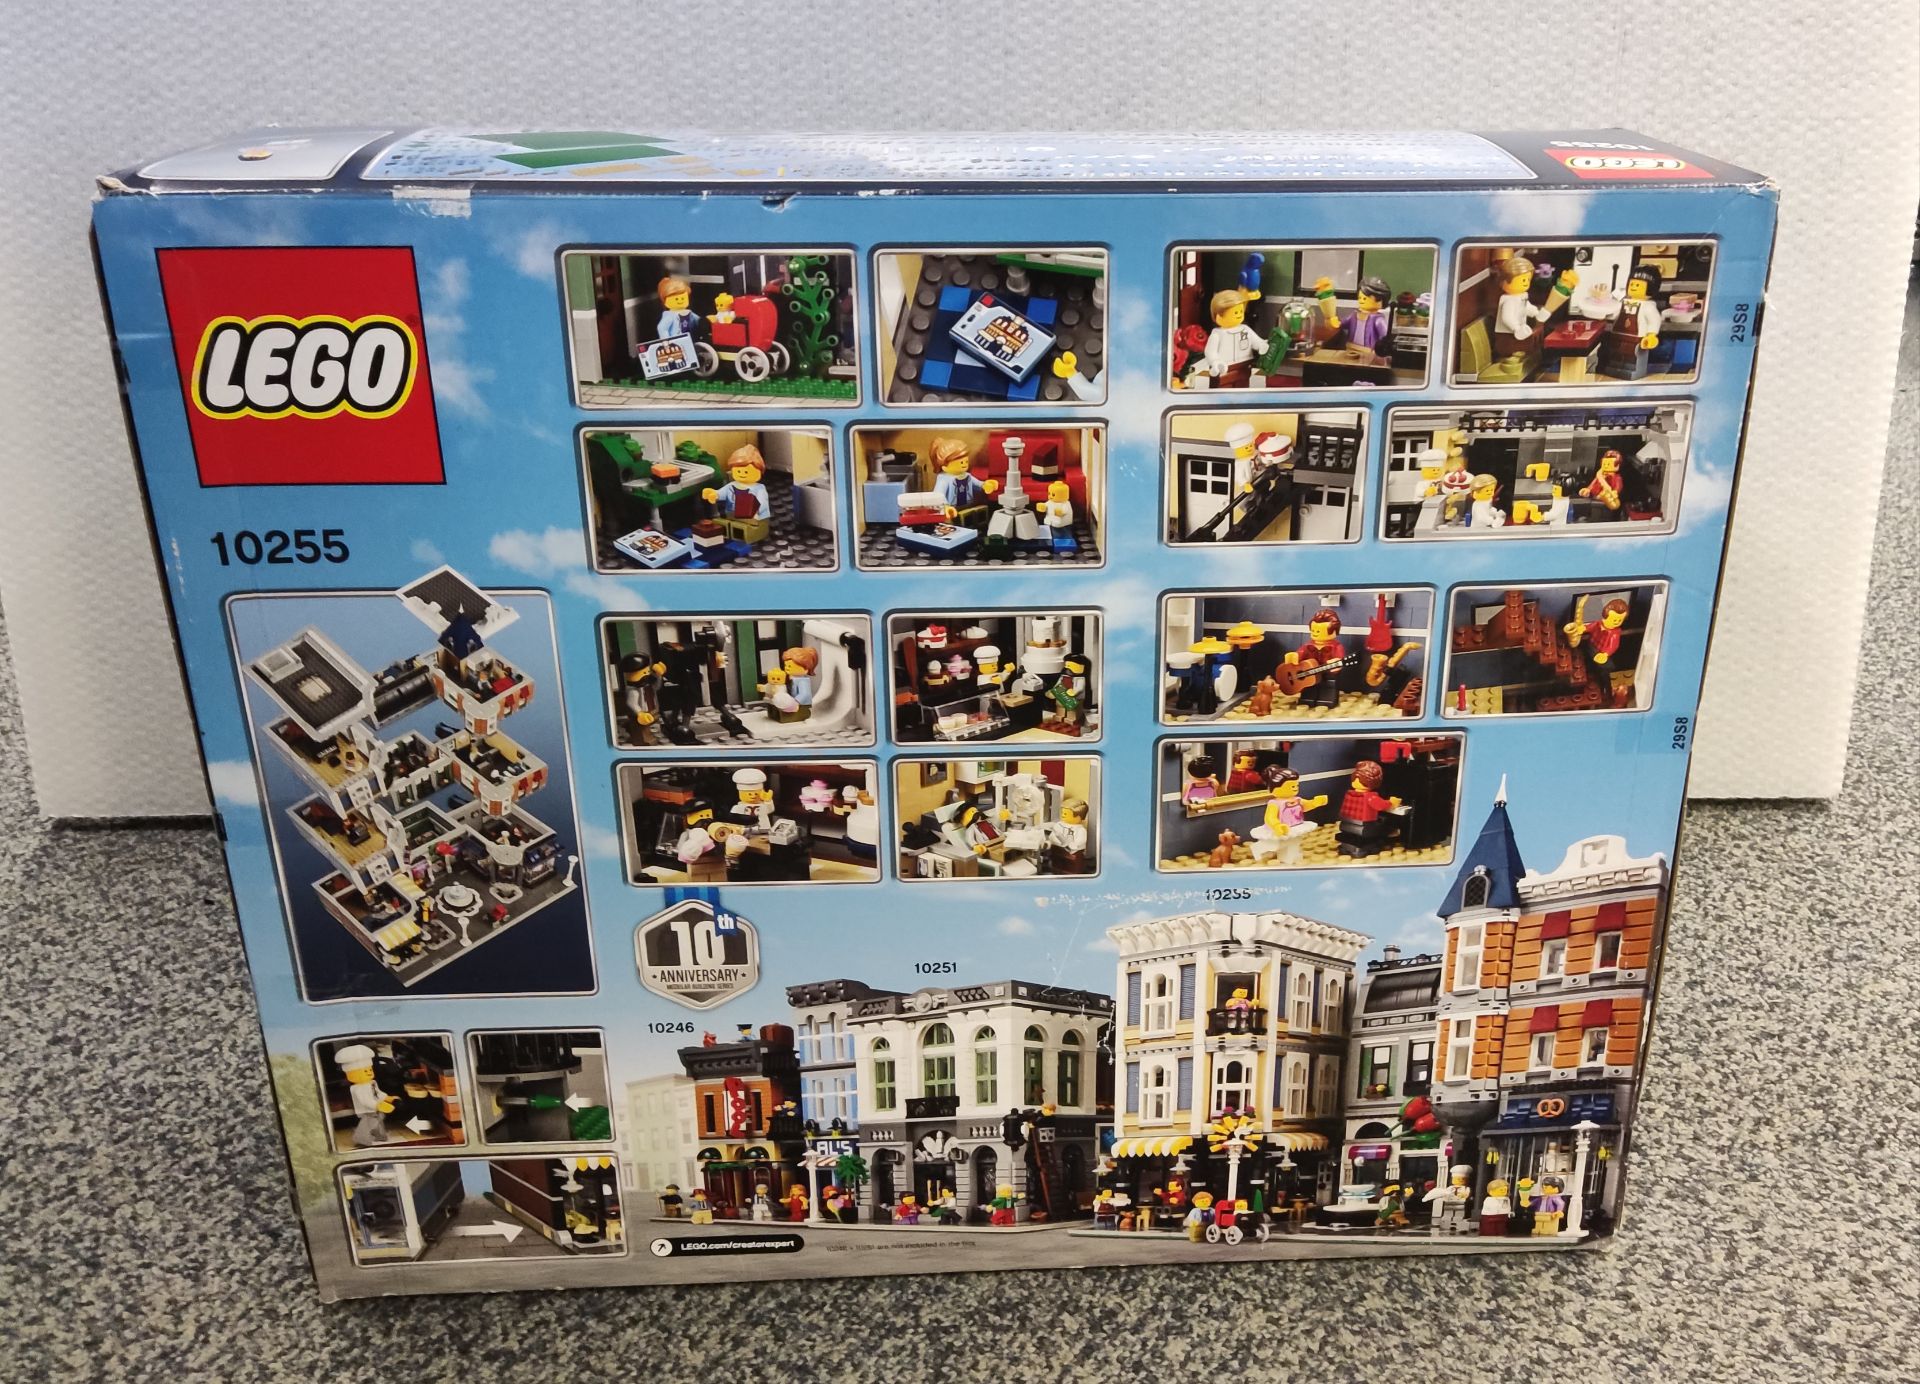 1 x Lego Creator Assembly Square - Set # 10255 - New/Boxed - Image 3 of 6